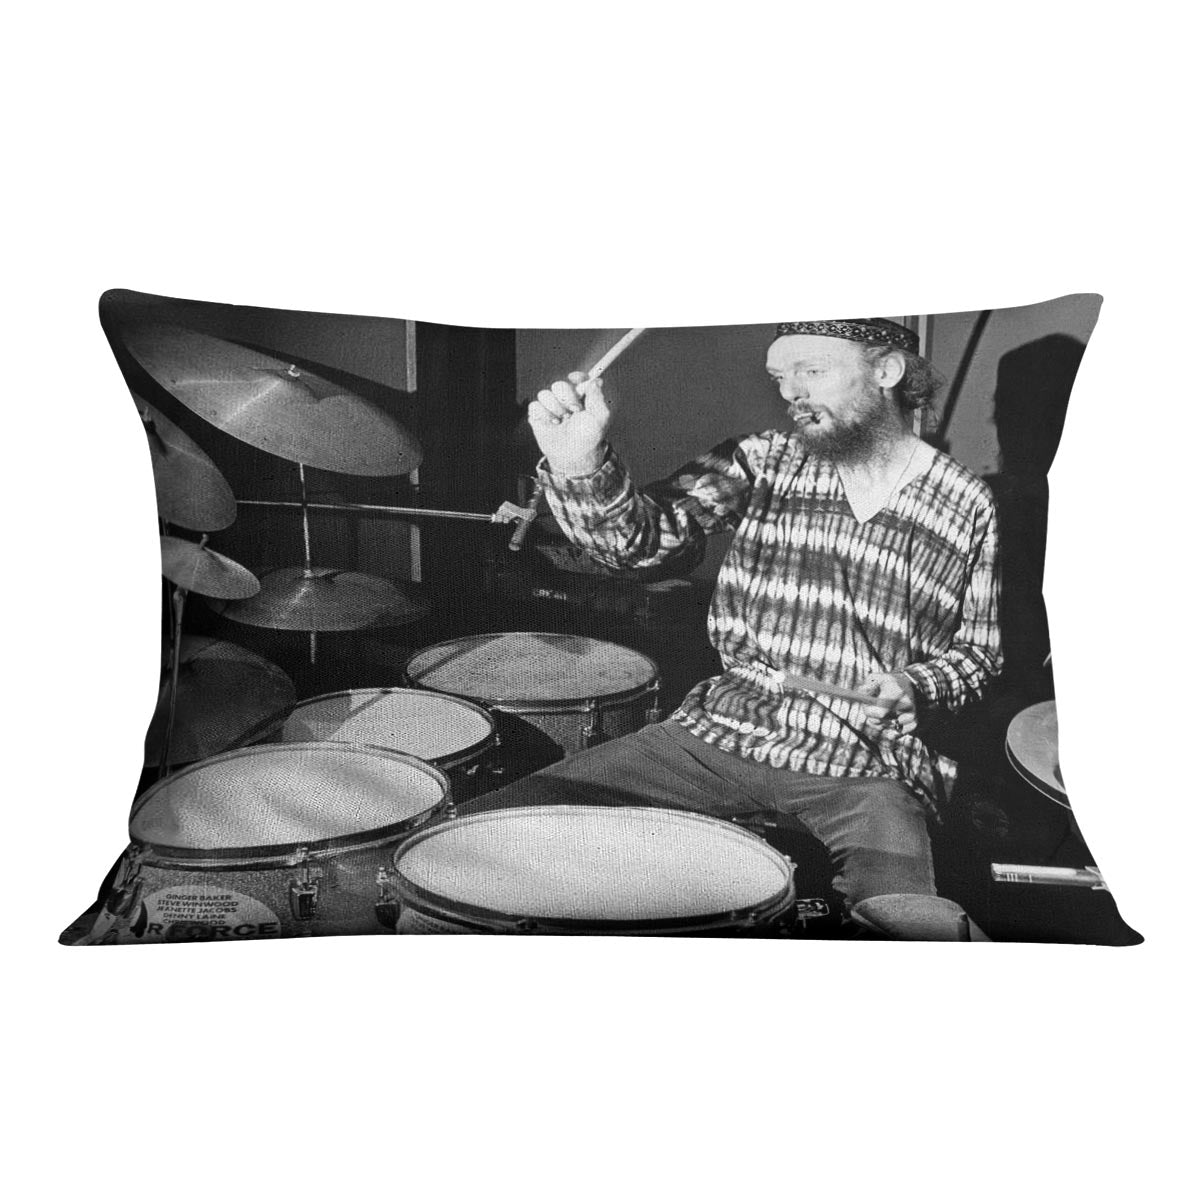 Ginger Baker on the drums Cushion - Canvas Art Rocks - 4